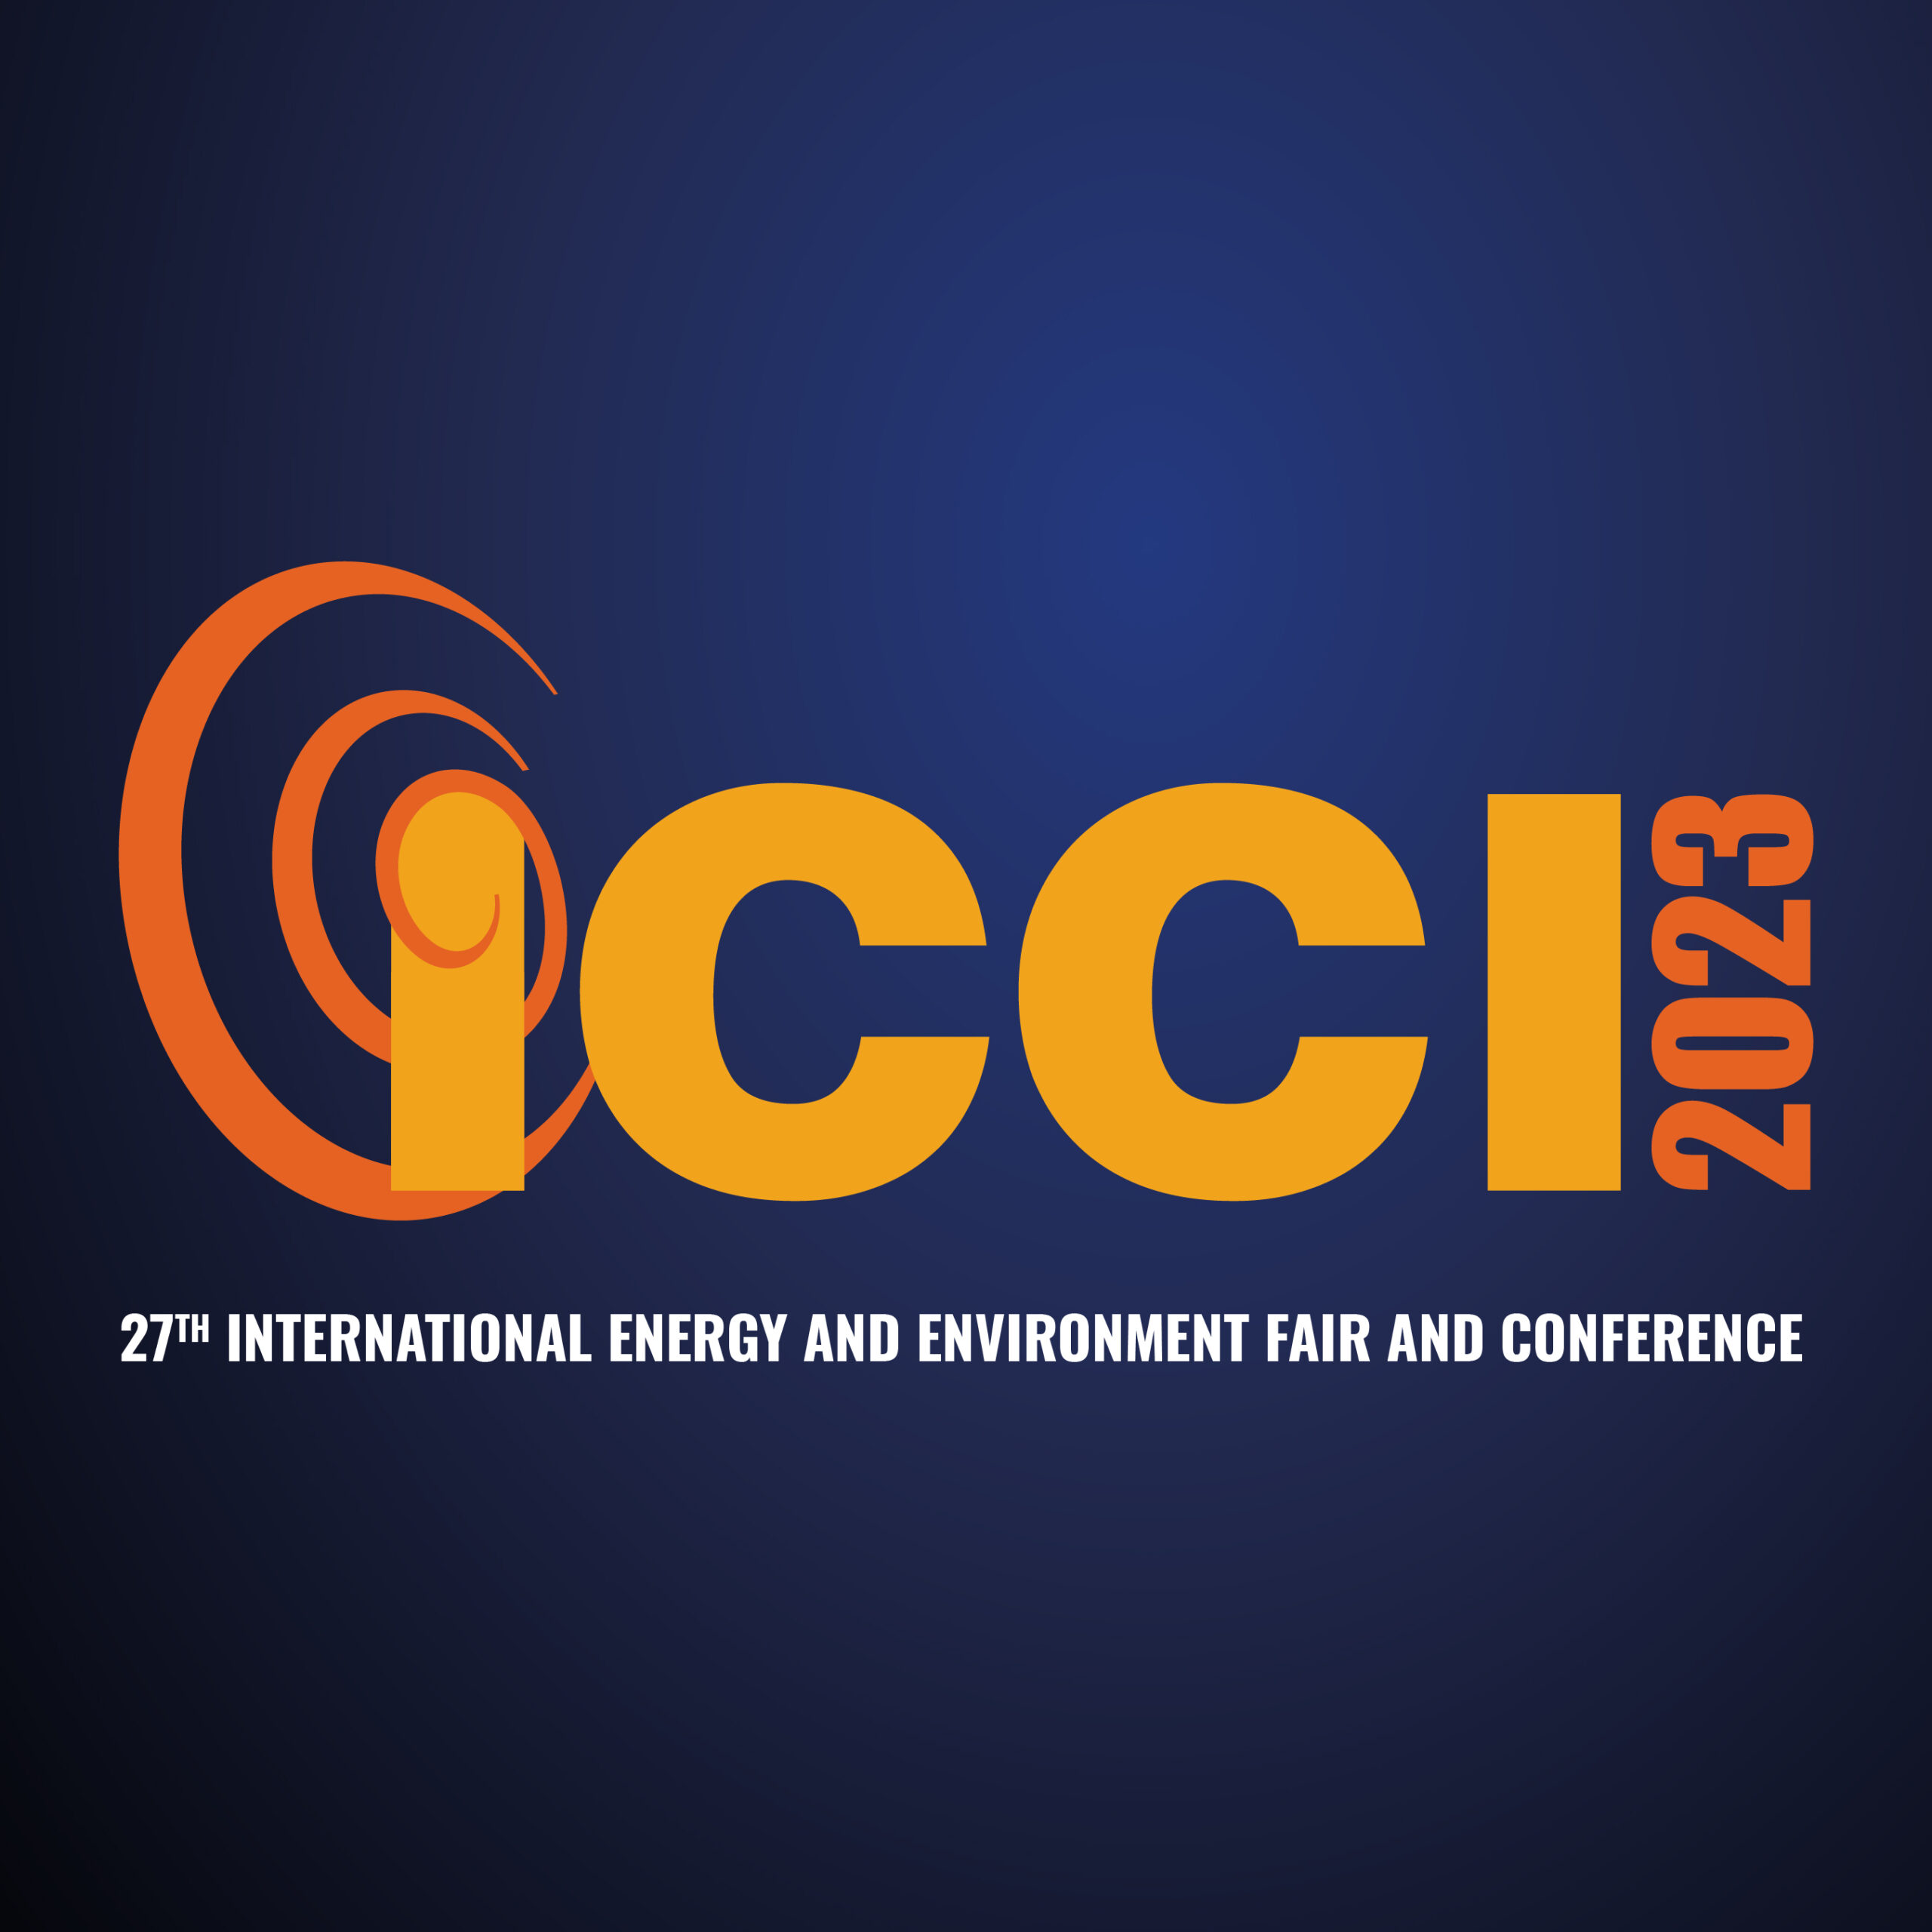 ICCI- International Energy and Environment Fair and Conference